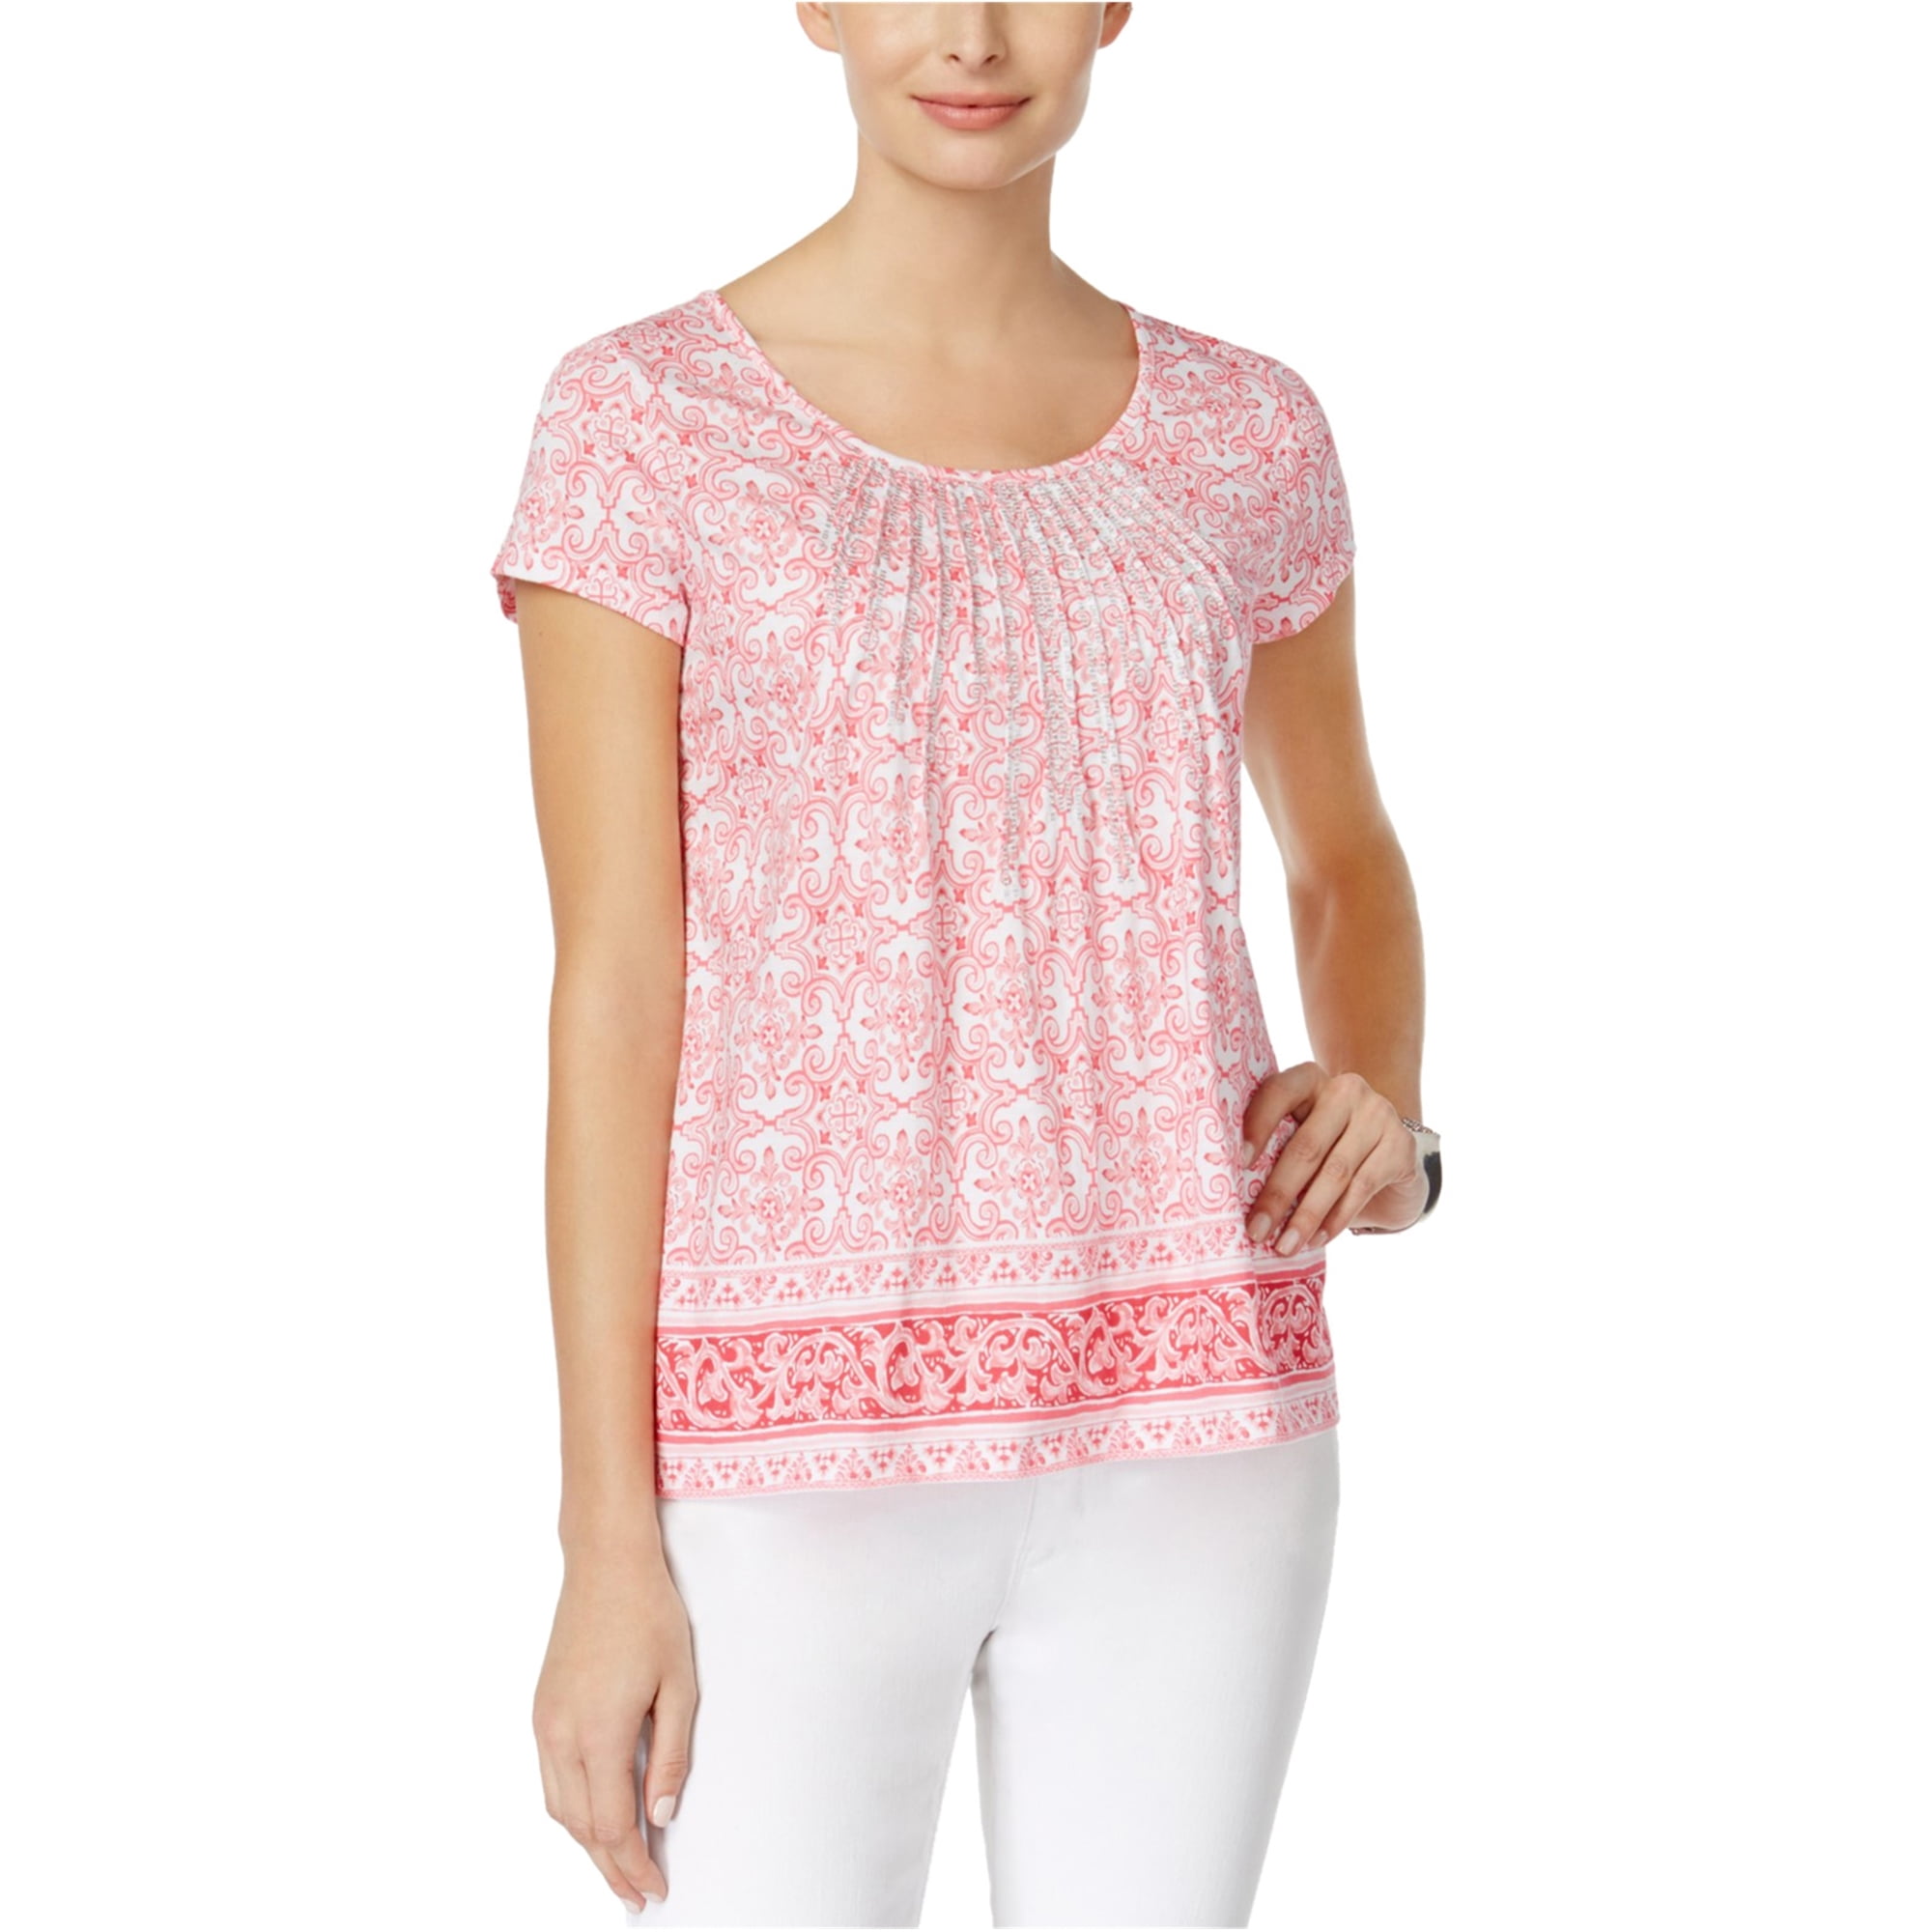 Charter Club Womens Pleated Printed Basic T-Shirt, Pink, Large 